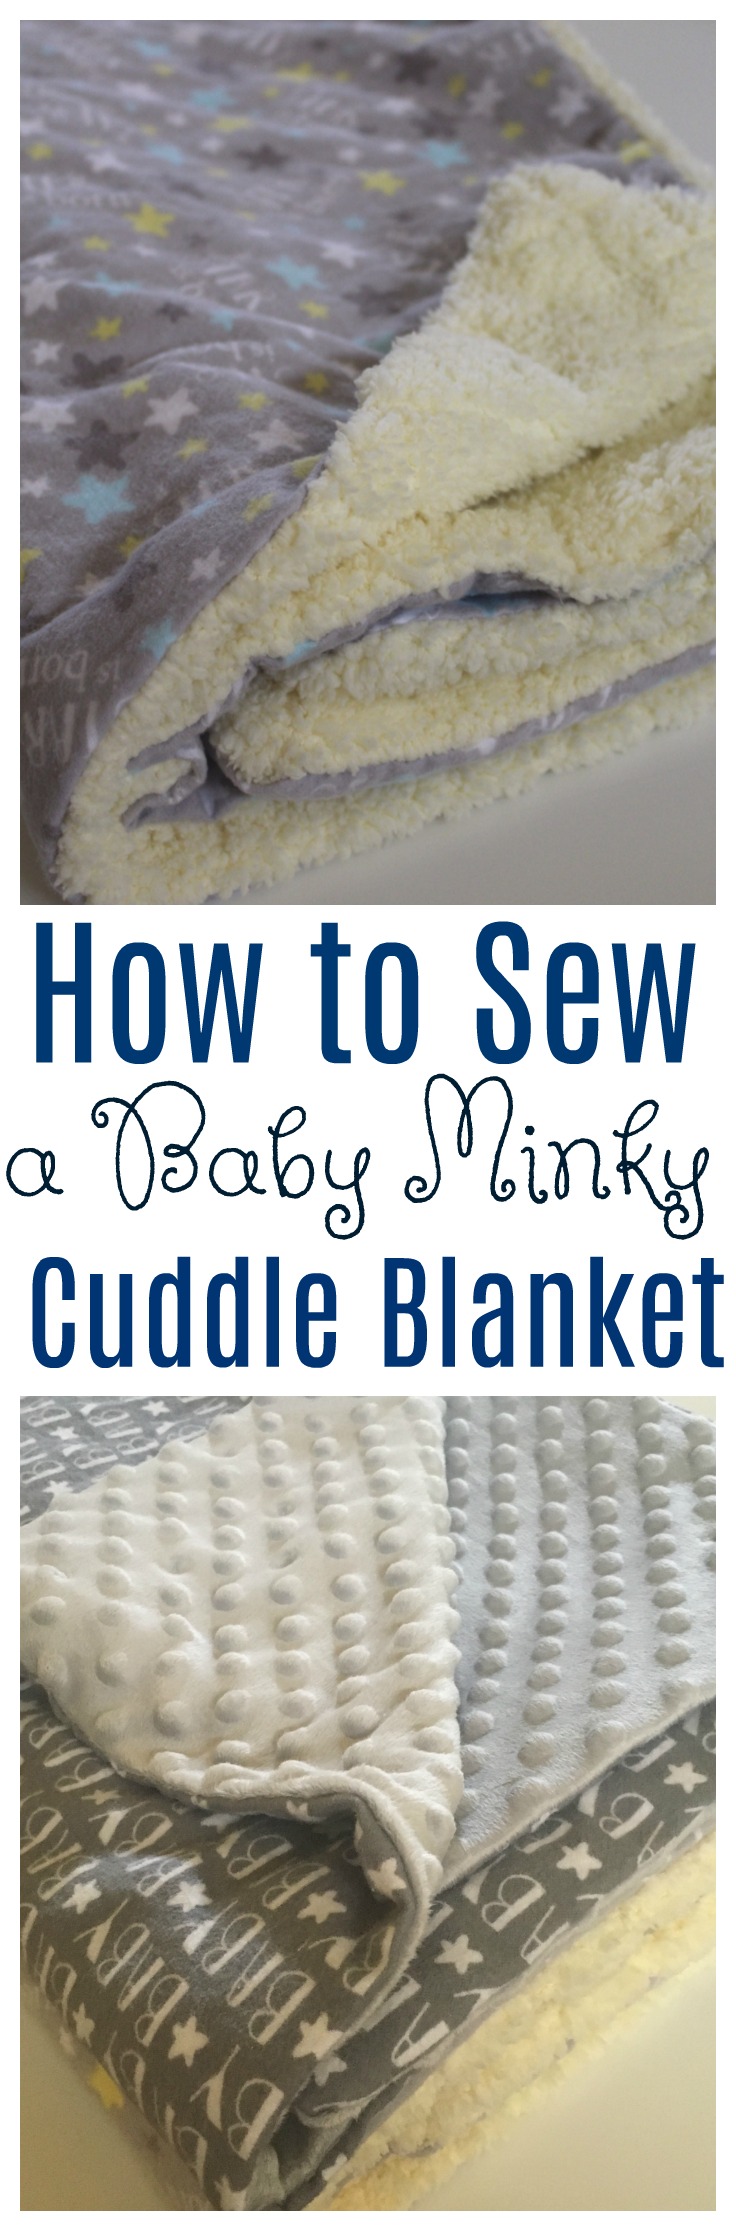 Homemade blankets make beautiful gifts for new babies, children and adults - learn how to sew a minky cuddle baby blanket in less than one hour!  